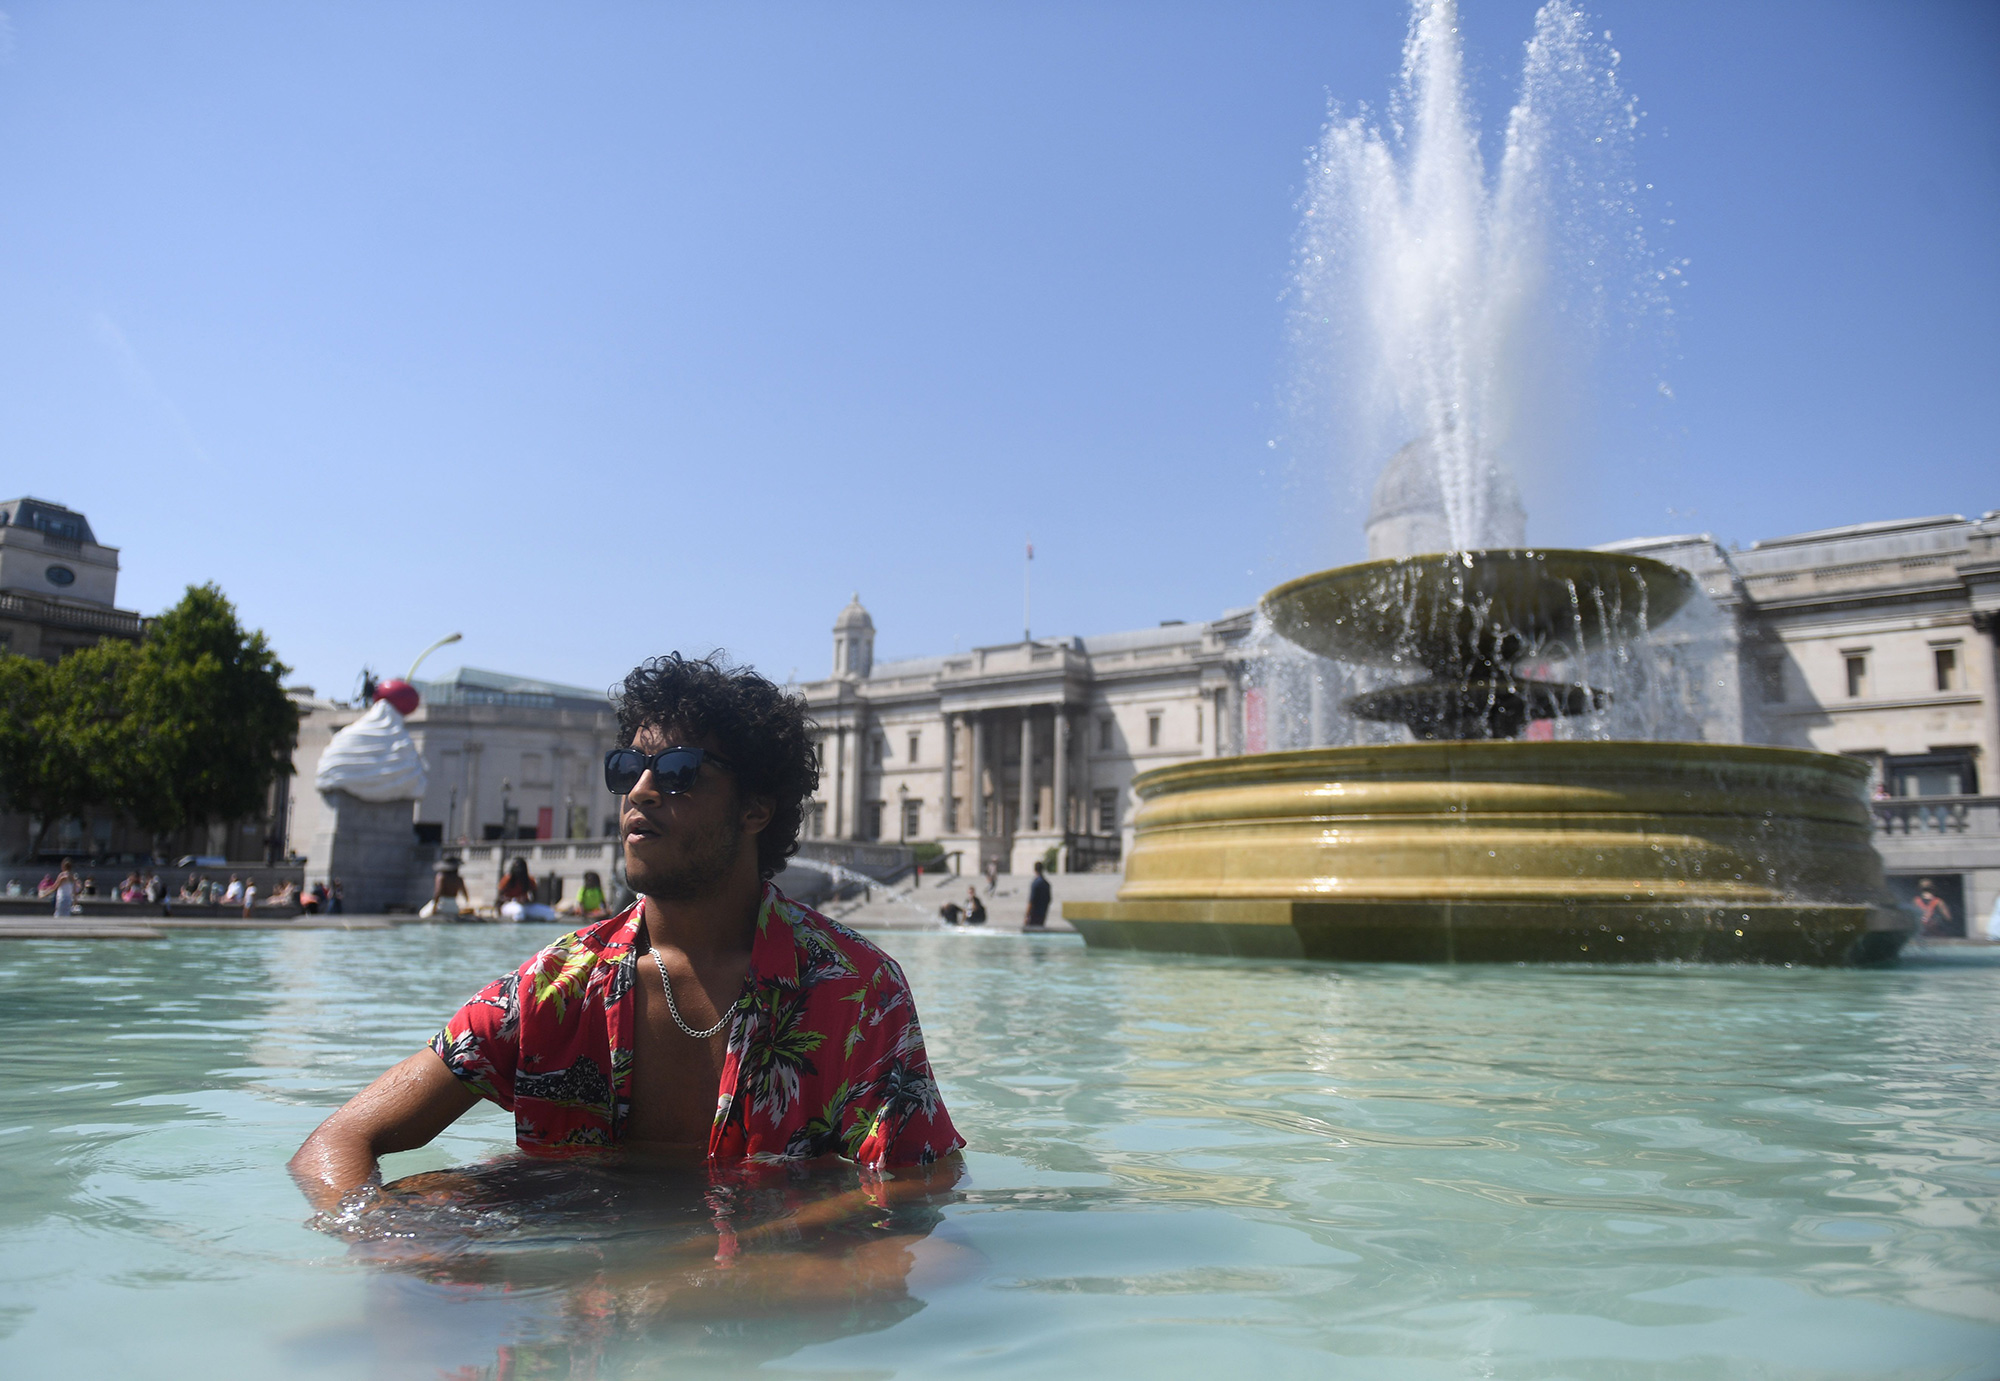 A man cools himself in a fountain on Trafalgar Square in London, England, on Tuesday 19 July.